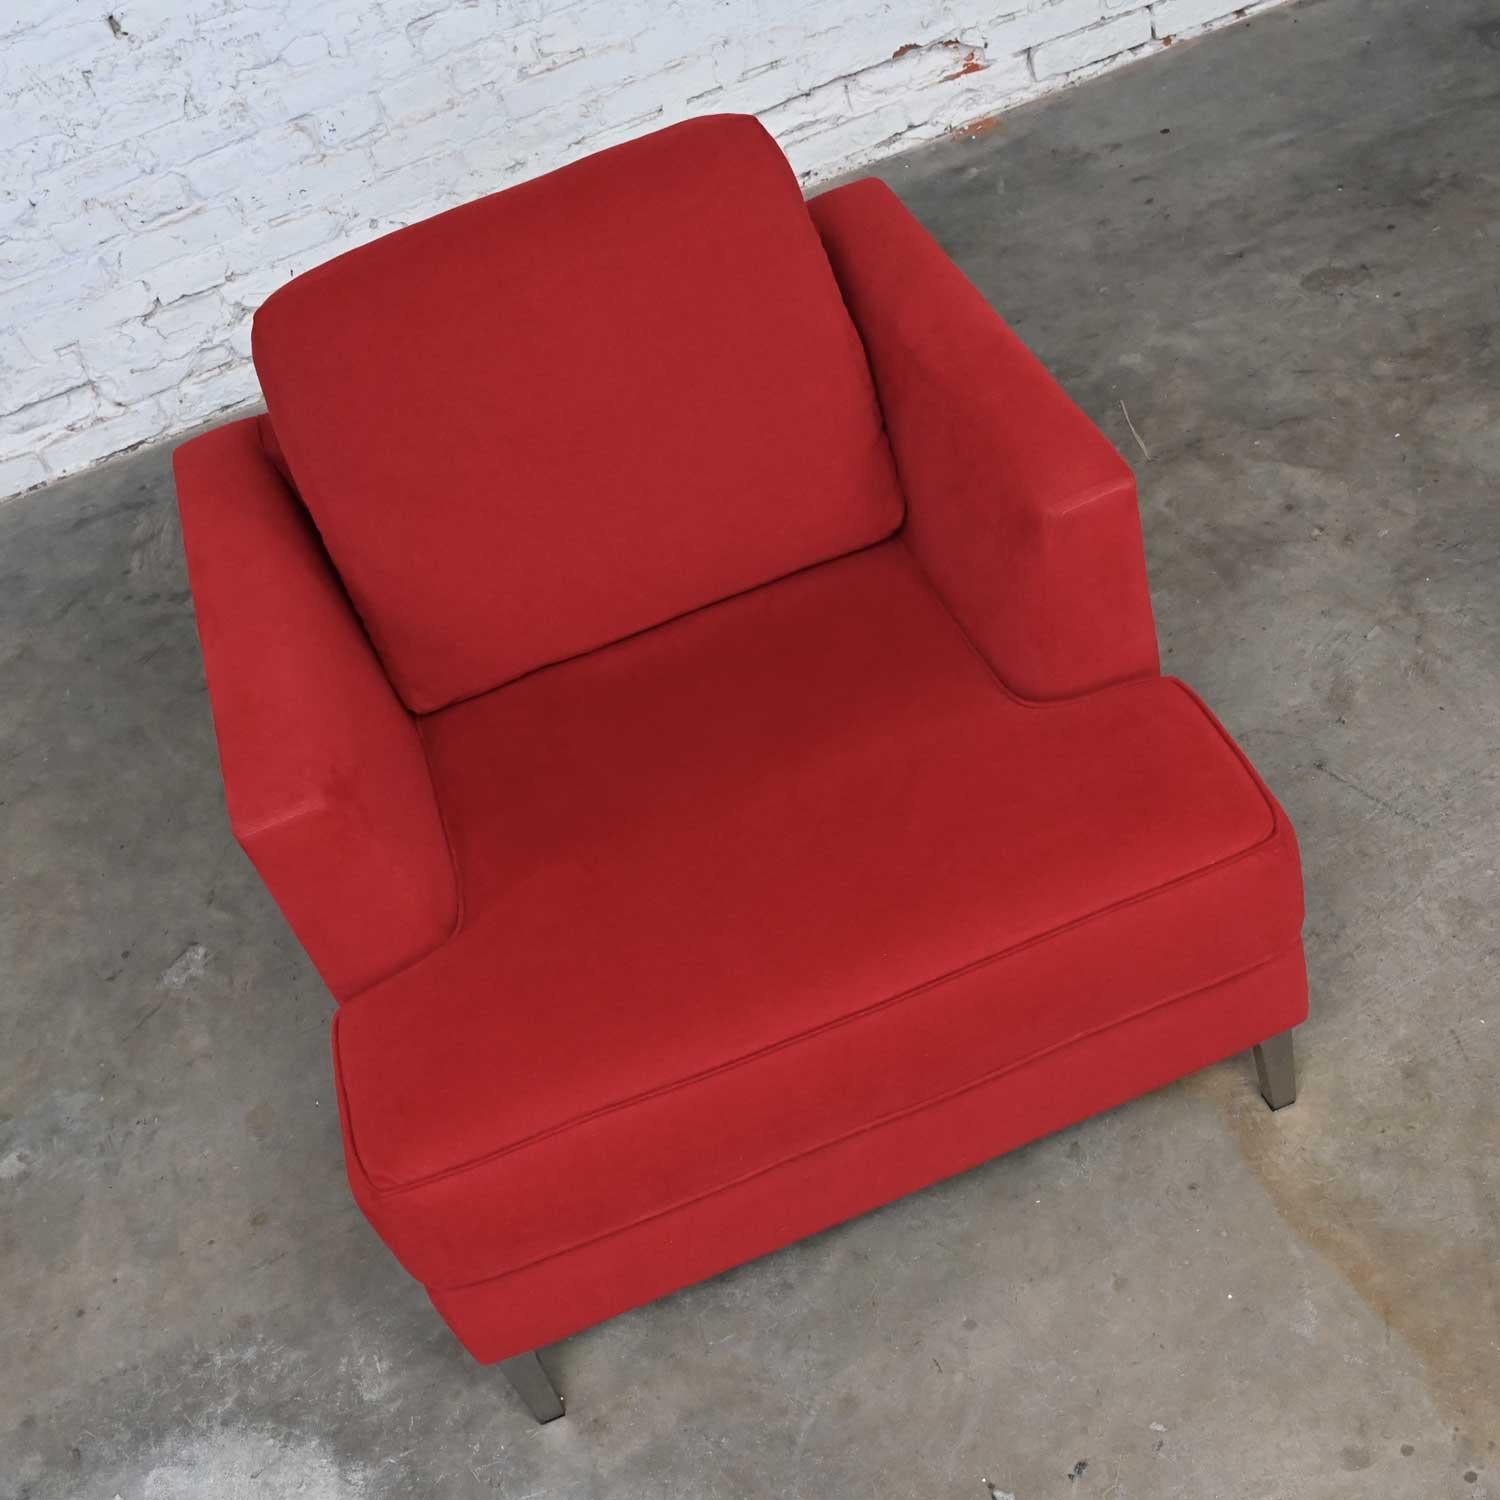 Modern Carter Club Chair Attr Zen Collection Bright Red with Polished Steel Legs For Sale 3